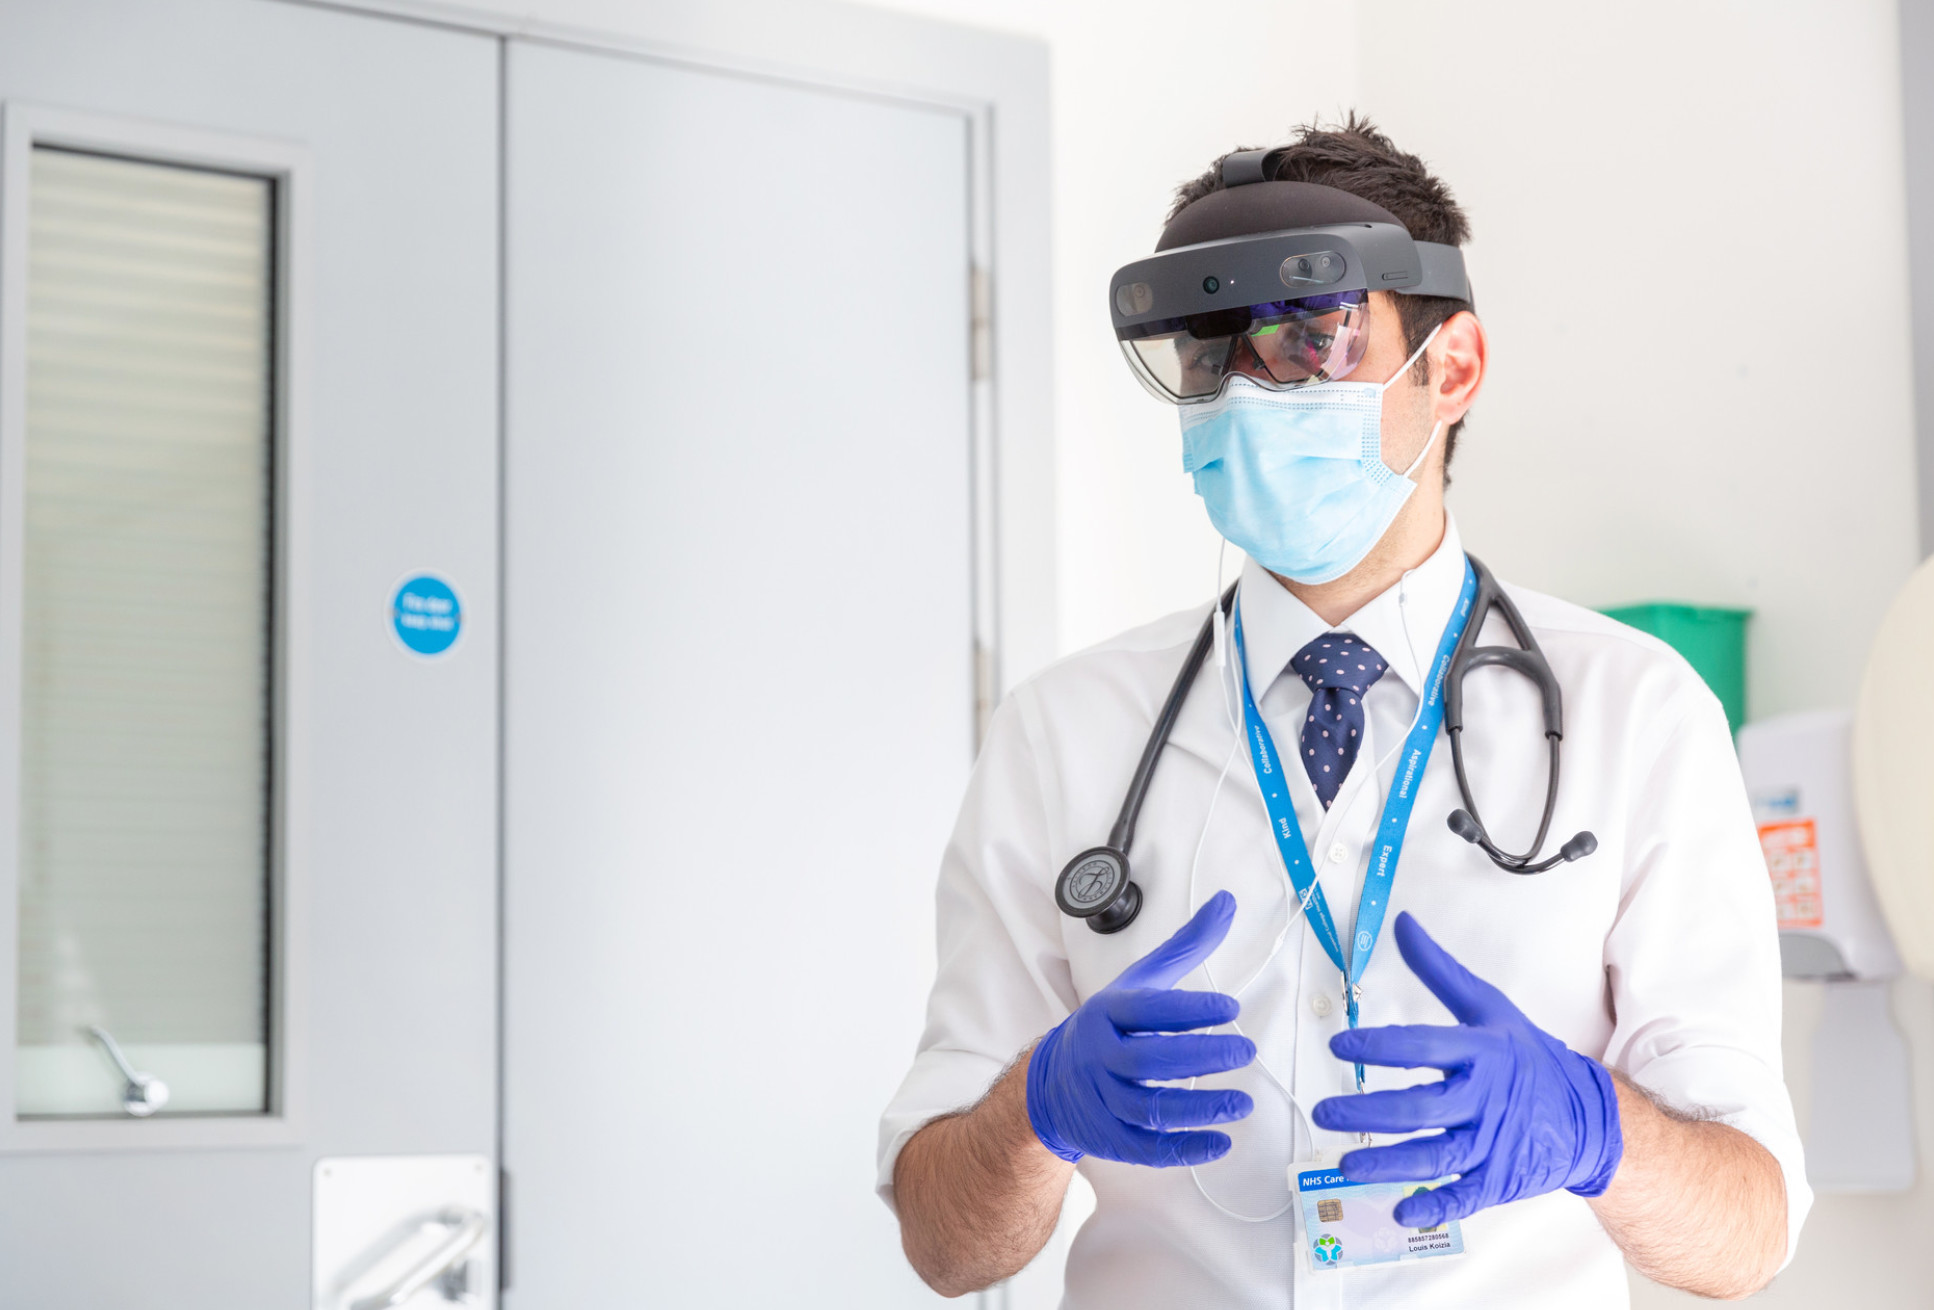 Dr Louis Koiza wears the HoloLens on site at St Mary’s Hospital (Photo: Thomas Angus